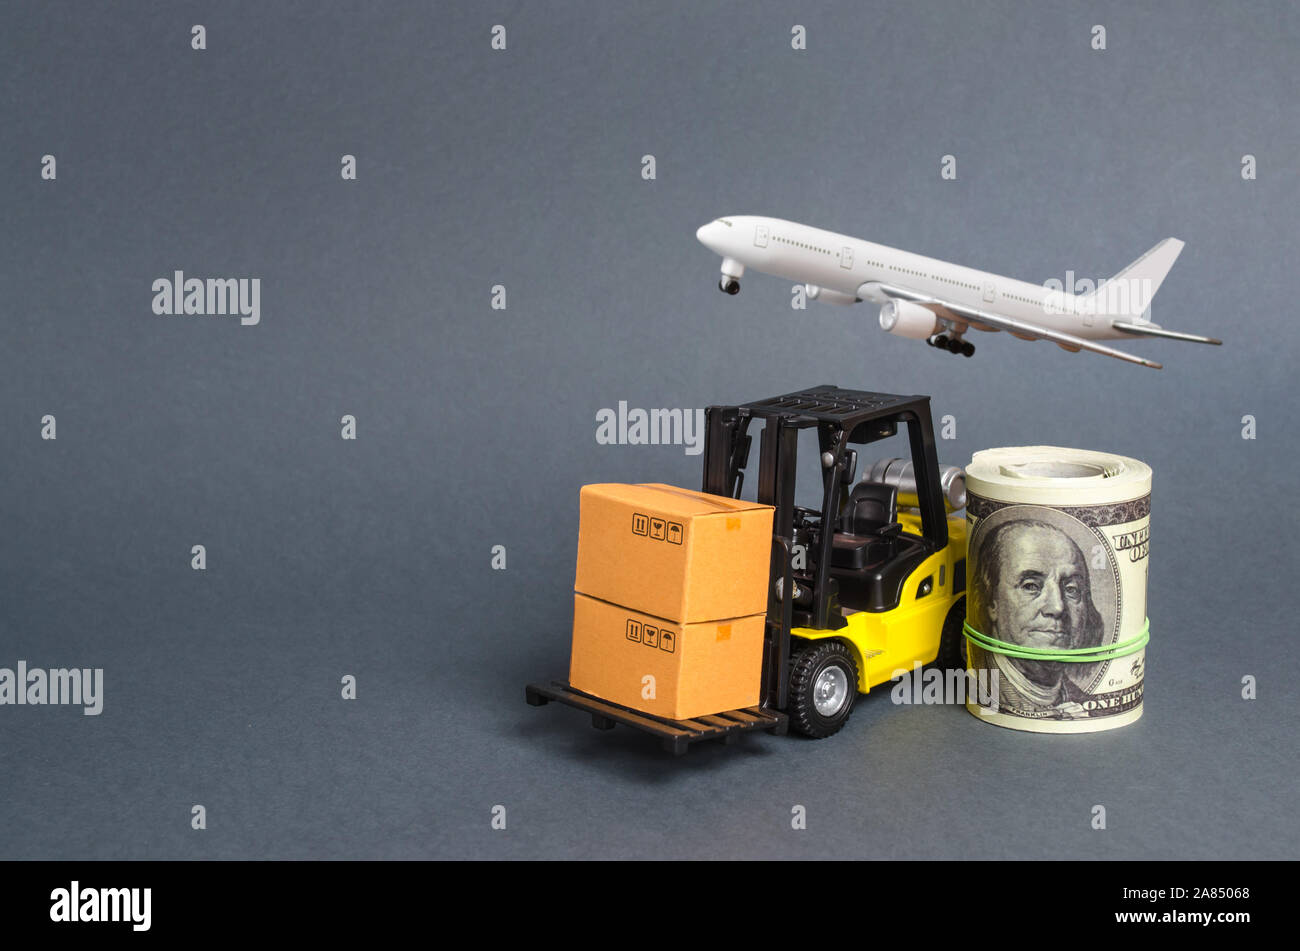 A forklift truck carries cardboard boxes near a dollar roll and airplane. Transport company. Performance efficient. Trade and production of products a Stock Photo